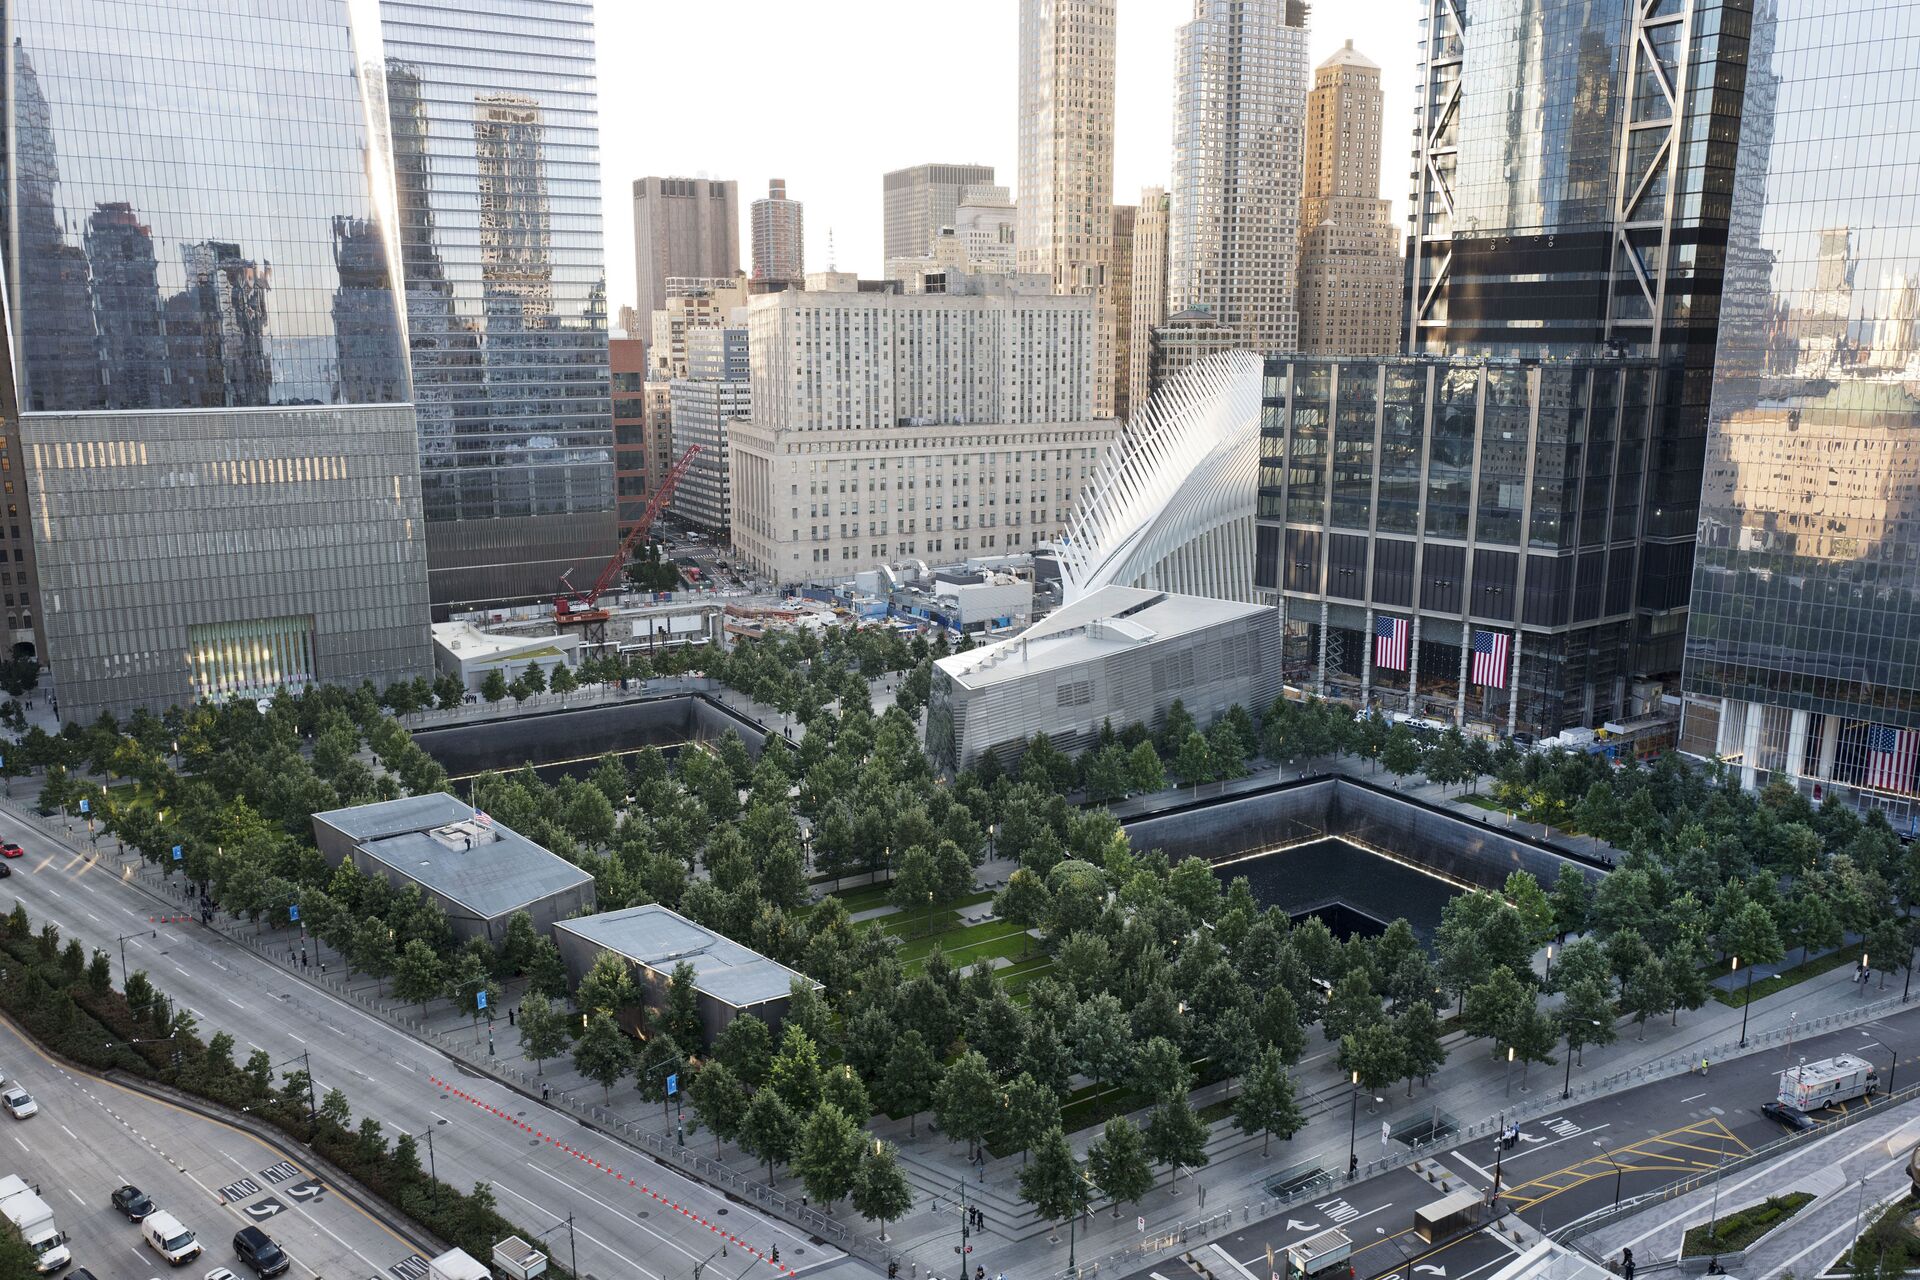 The National September 11 Memorial and Museum are set for a memorial service, Monday, Sept. 11, 2017, in New York. Thousands of 9/11 victims' relatives, survivors, rescuers and others are expected to gather Monday at the World Trade Center to remember the deadliest terror attack on American soil. Nearly 3,000 people died when hijacked planes slammed into the trade center, the Pentagon and a field near Shanksville, Pa., on Sept. 11, 2001.  - Sputnik International, 1920, 07.09.2021